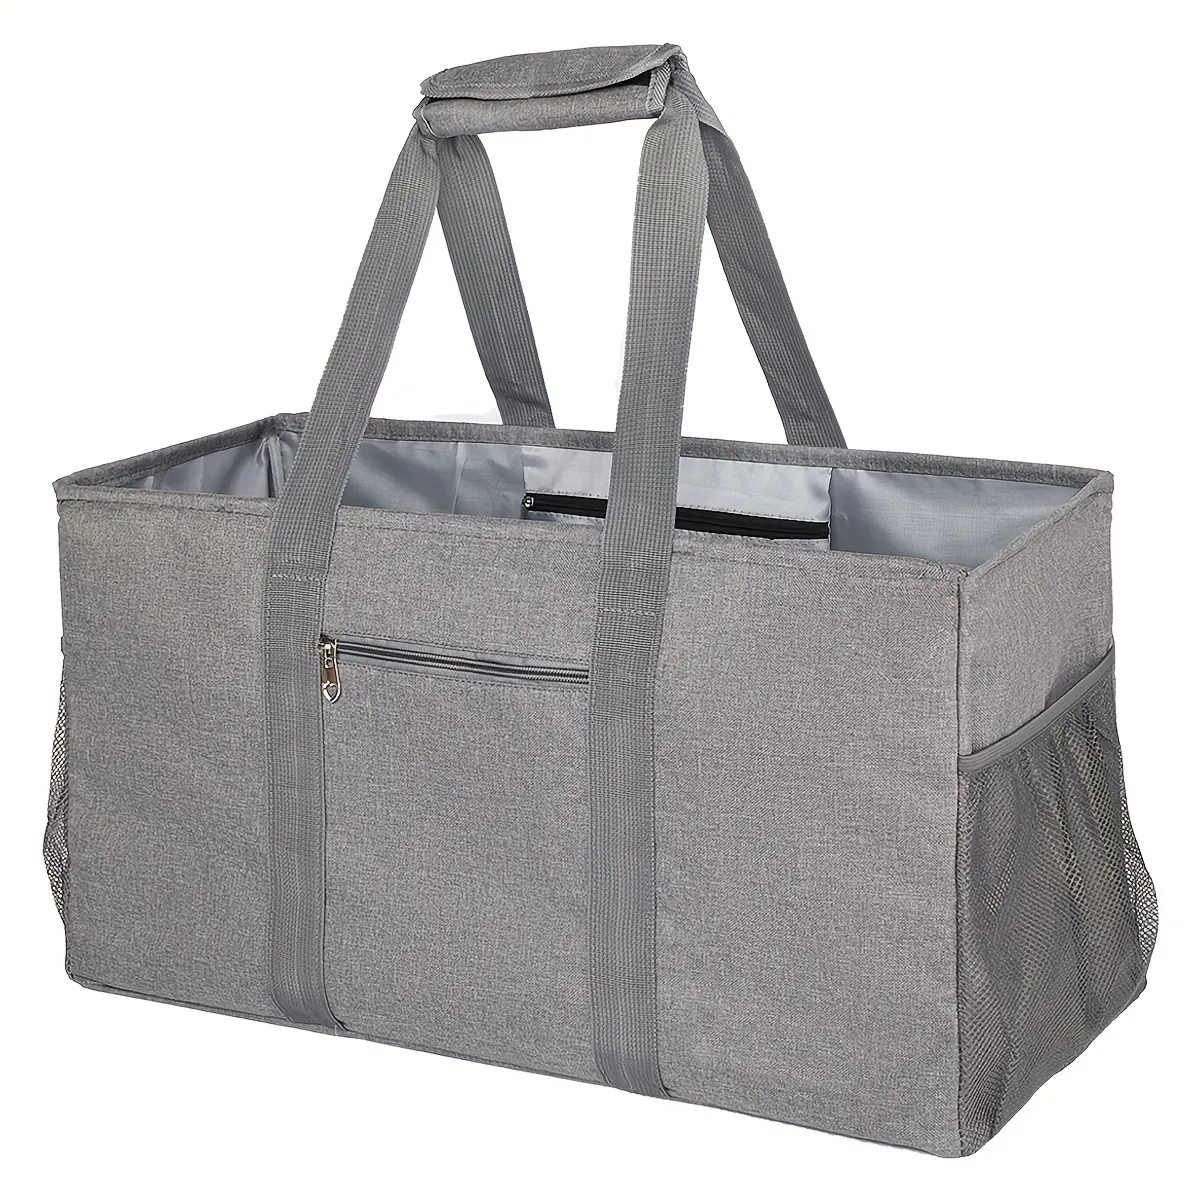 Insulated Large Utility Tote Bag For Beach, Camping, And Picnics